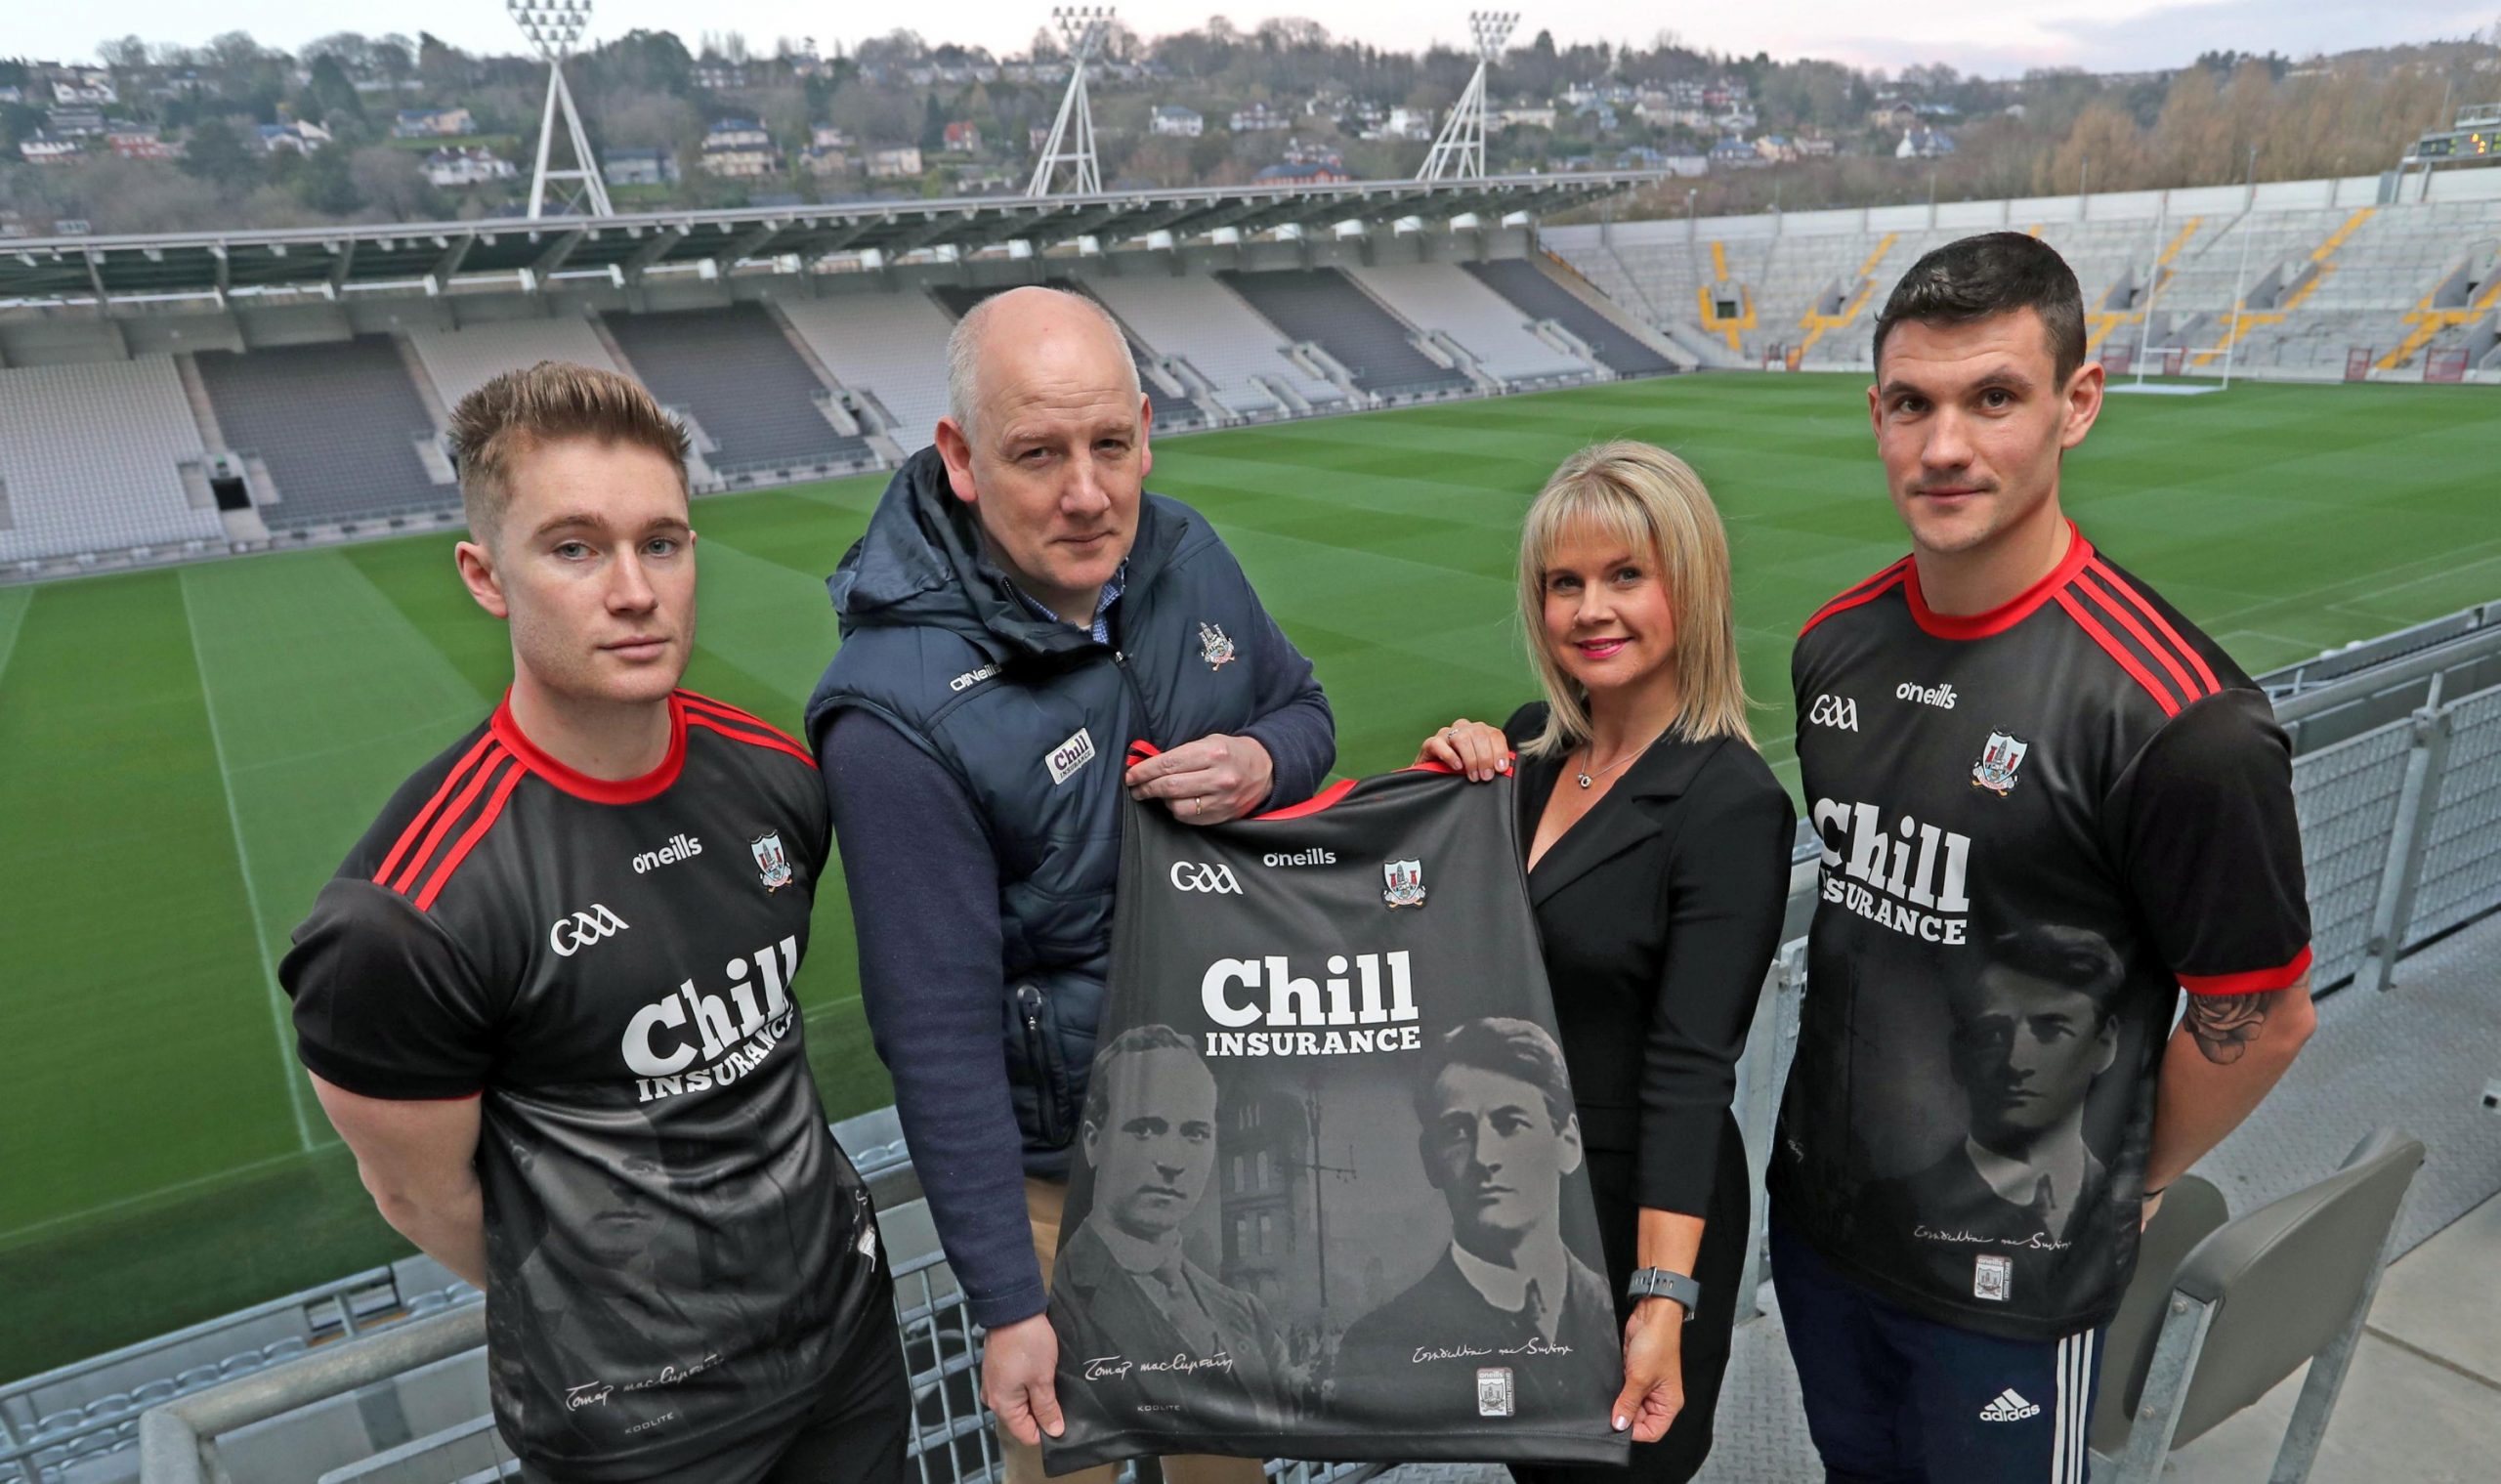 Commemorative Jersey to be worn in Pairc Ui Chaoimh today – Cork GAA